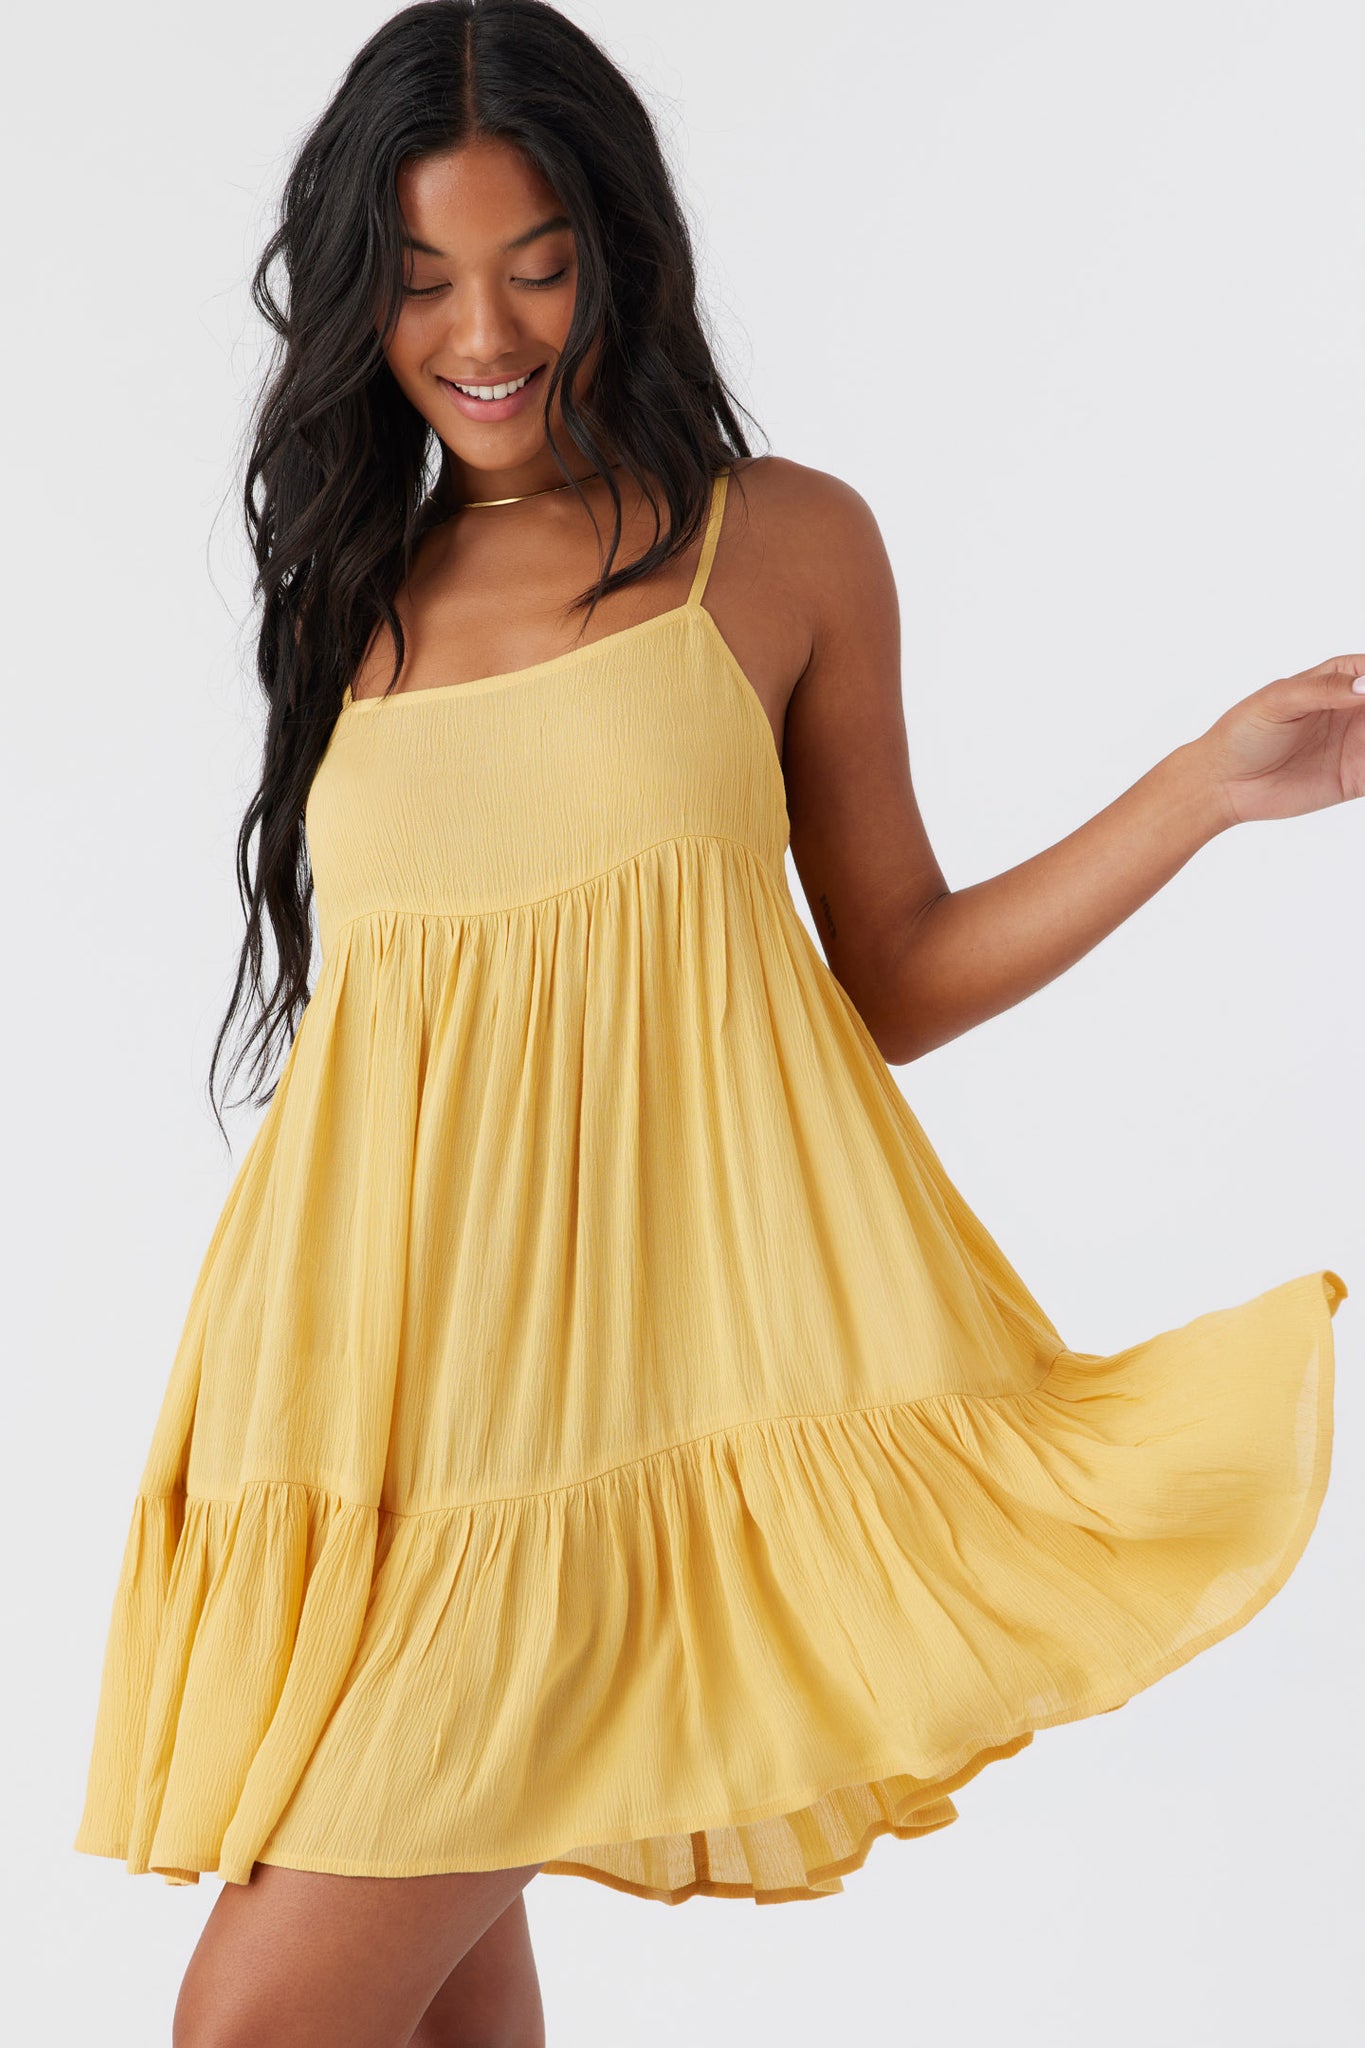 SALTWATER SOLIDS RILEE SWIM COVER-UP DRESS